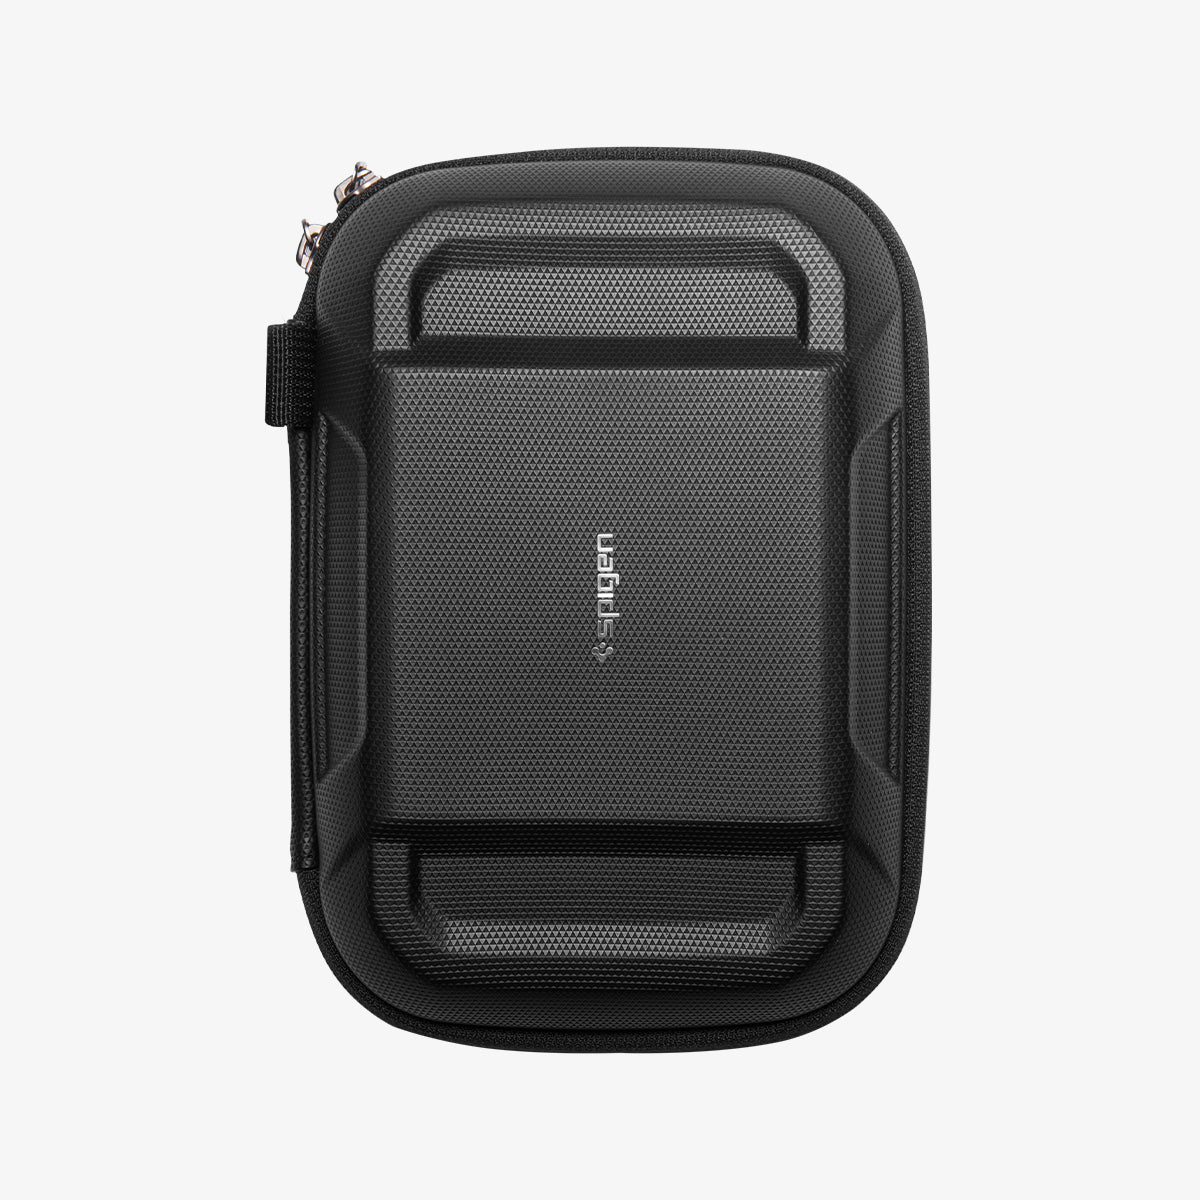 AFA04310 - DJI Action 2 Case Rugged Armor Pro Pouch in black showing the front